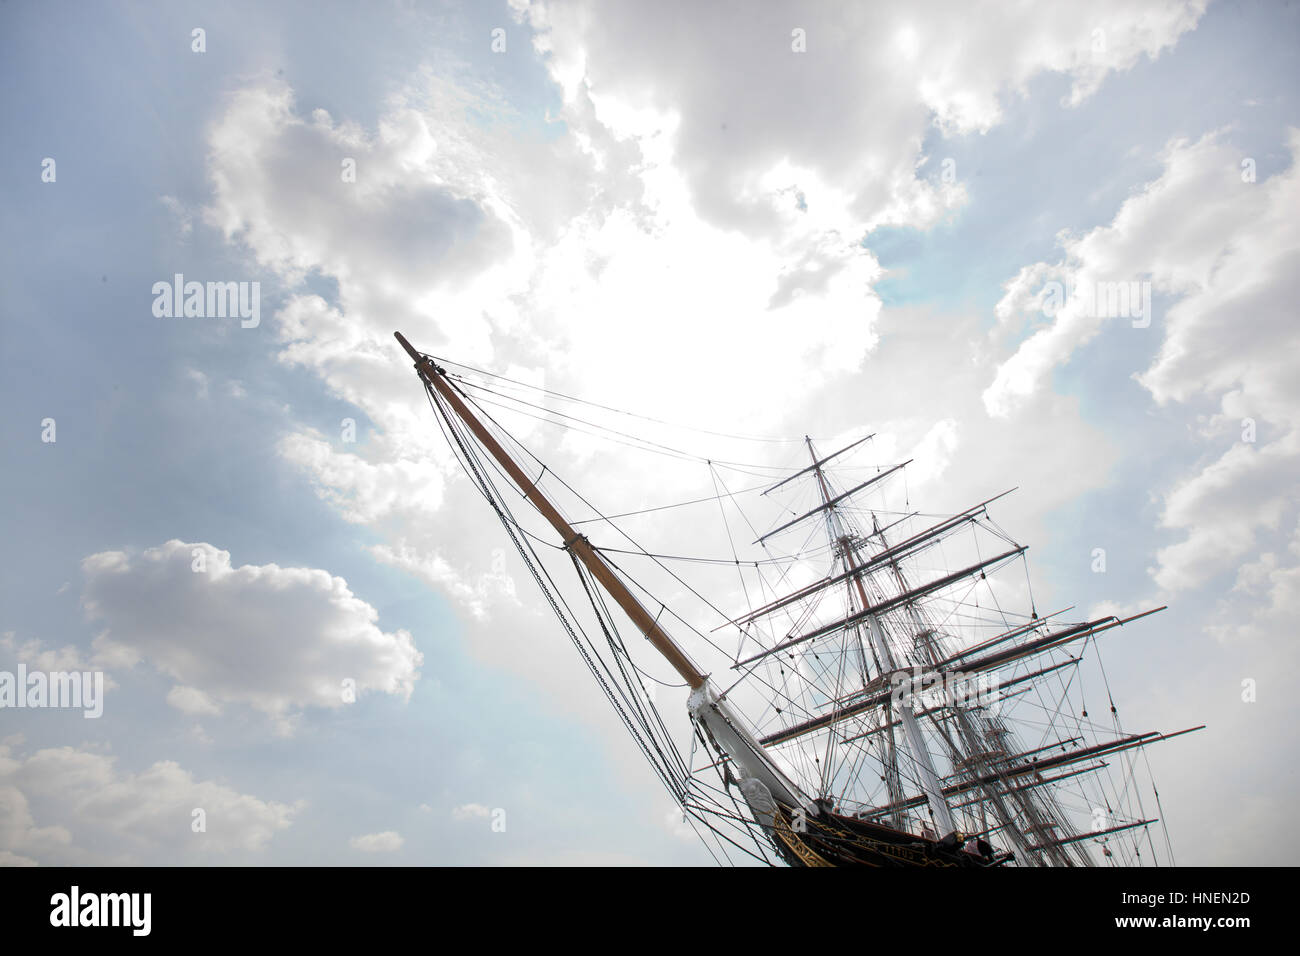 Low angle view of three masted ship against cloudy sky Stock Photo